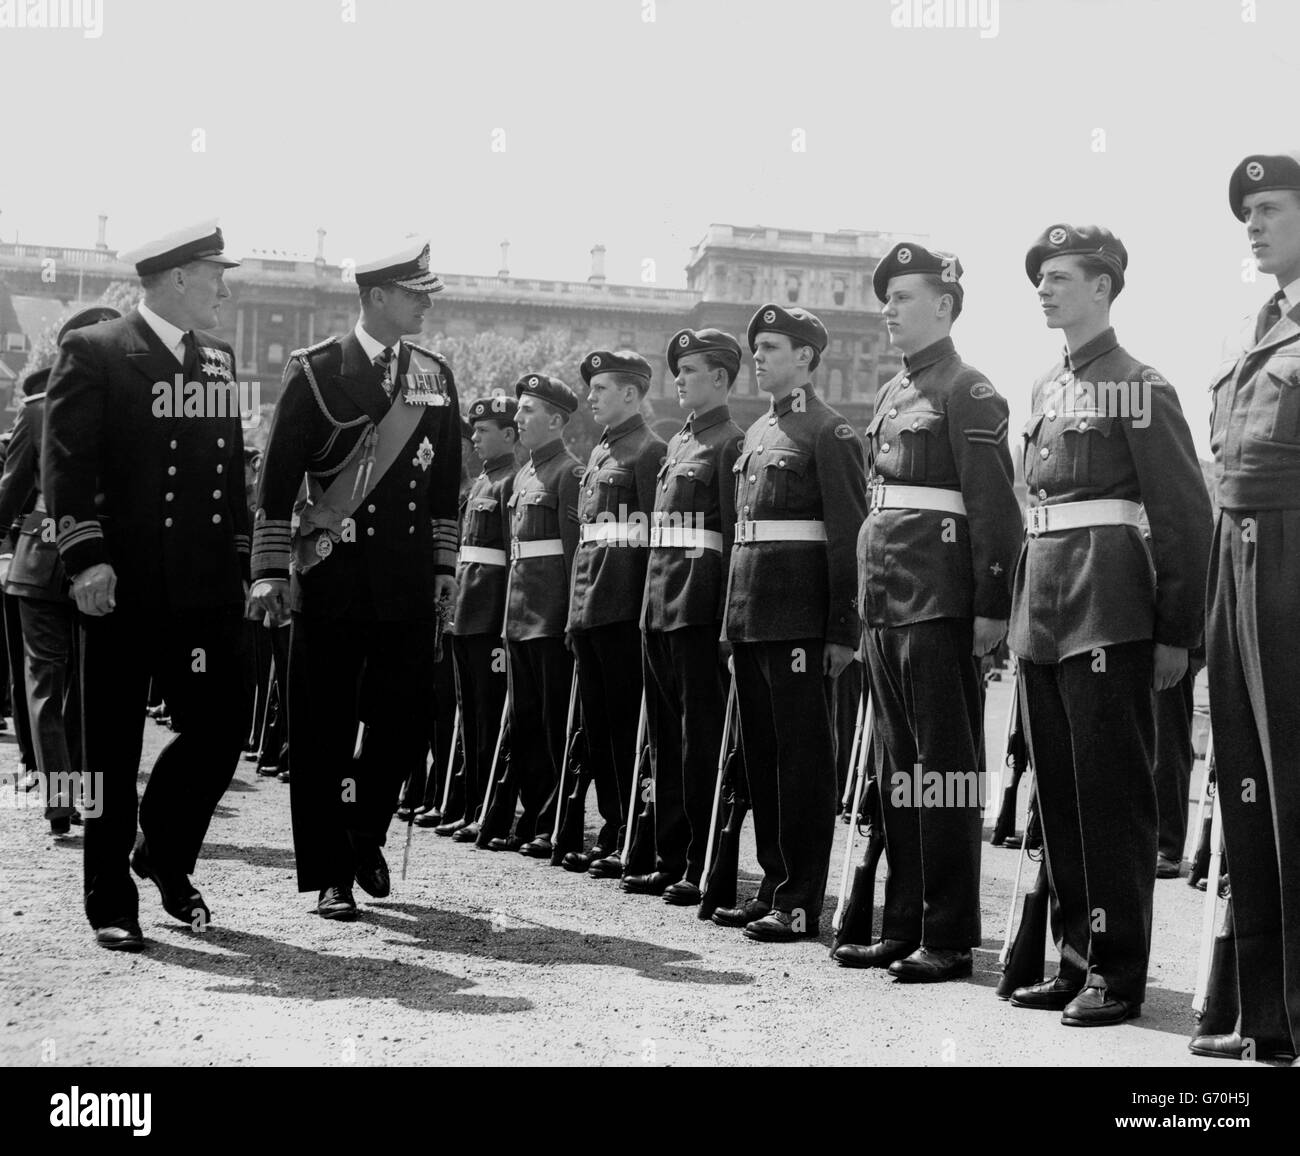 The Duke of Edinburgh inspecting the Air Training Corps contingent at the ceremonial parade of the cadet corps of the three Services on the Horse Guards Parade, London. The parade was a preliminary to the cadets' entry into the Services. Stock Photo